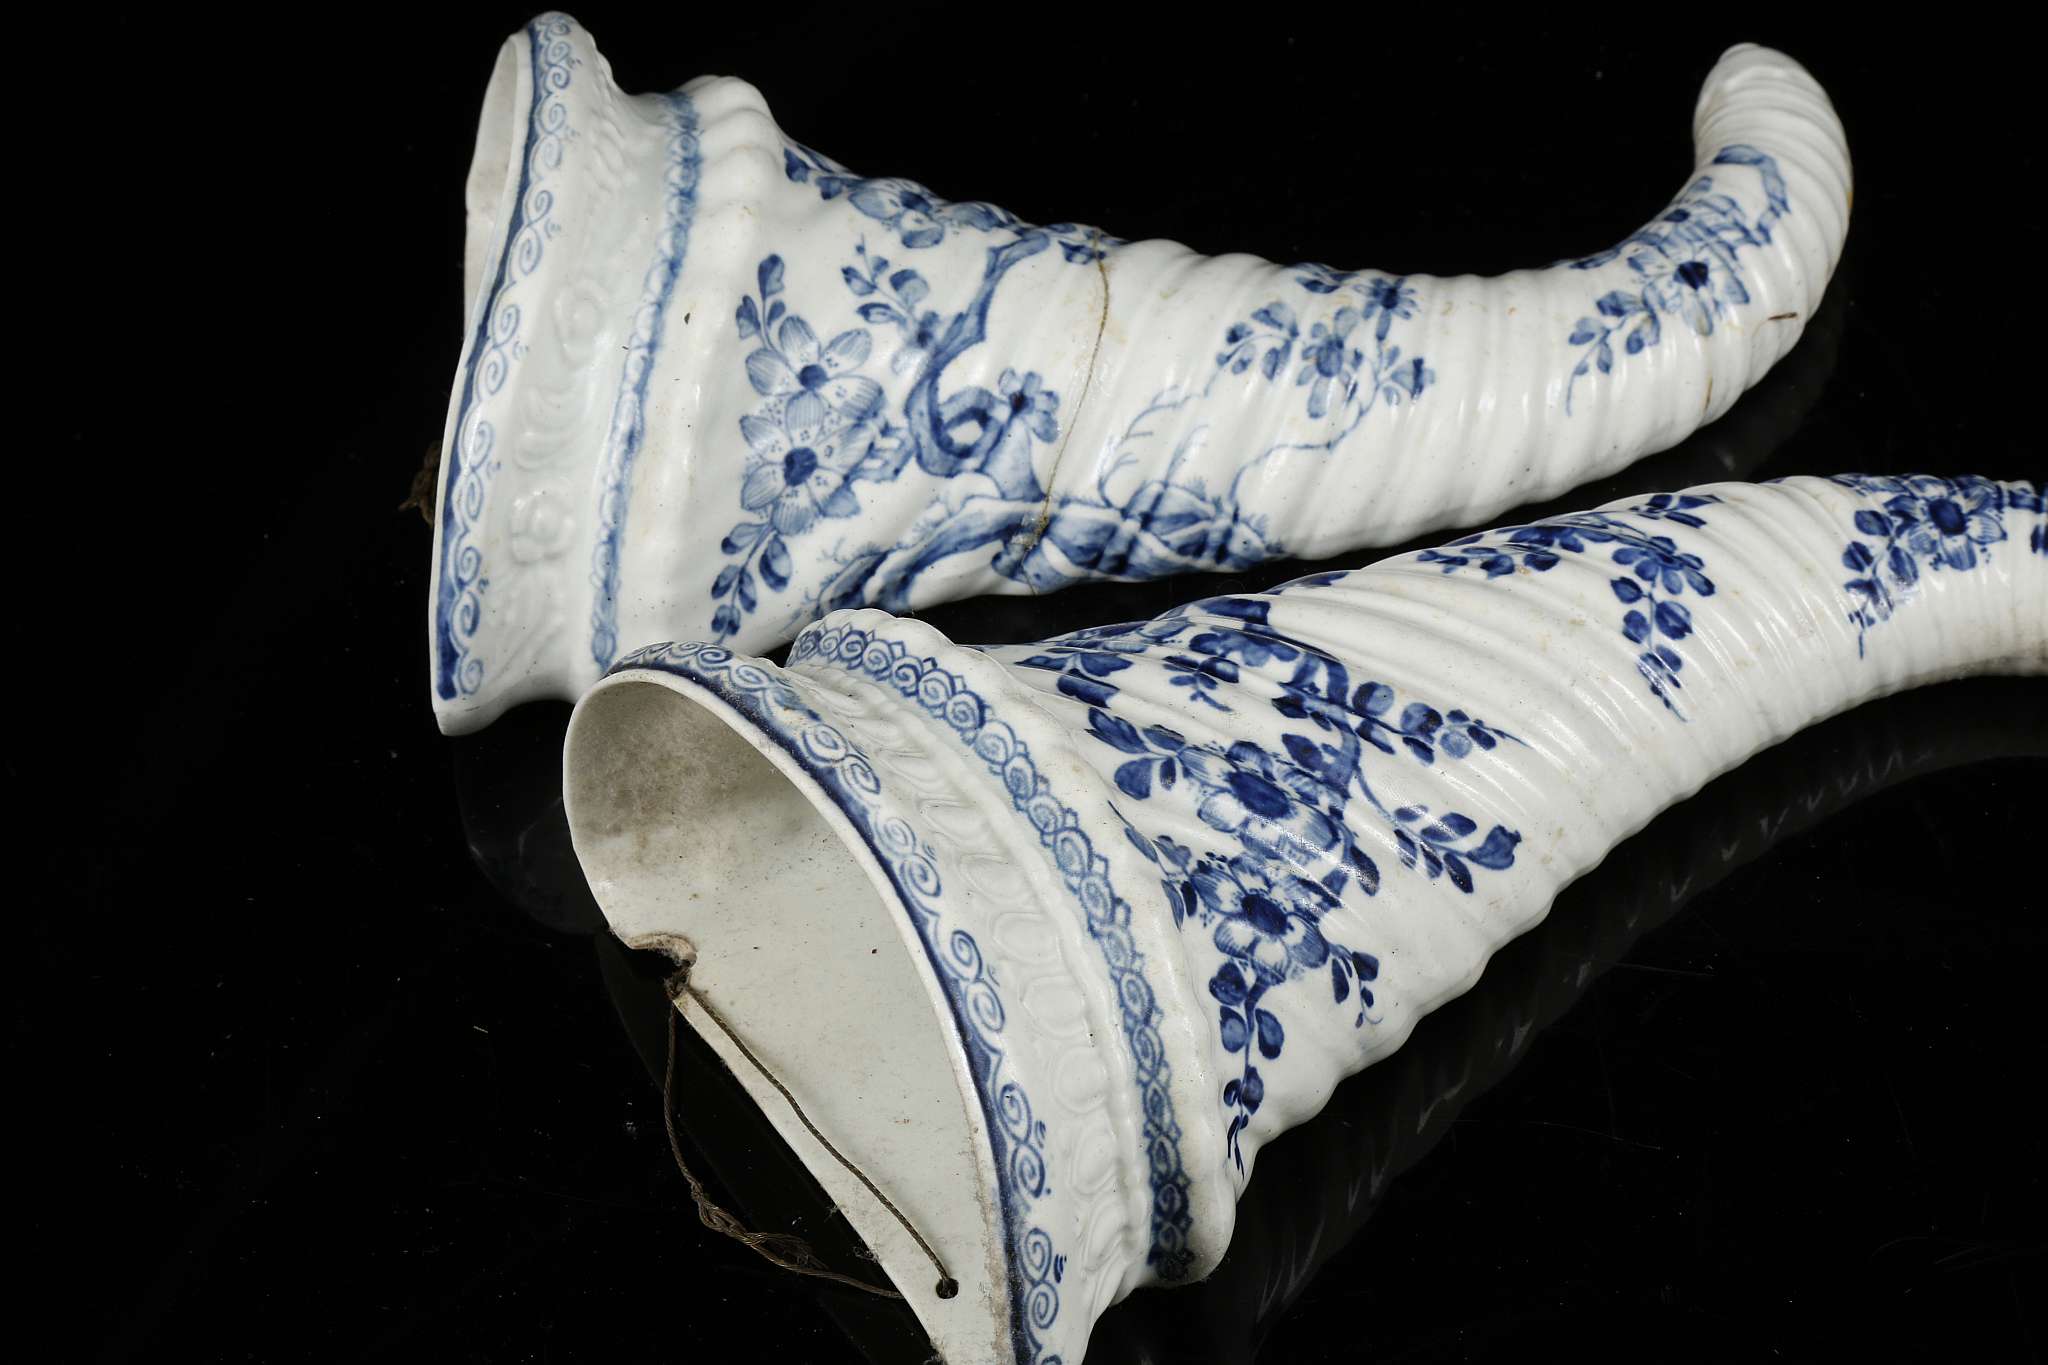 TWO WORCESTER PORCELAIN CORNUCOPIA WALL POCKETS, circa 1755-60, both of spirally moulded horn - Image 3 of 5